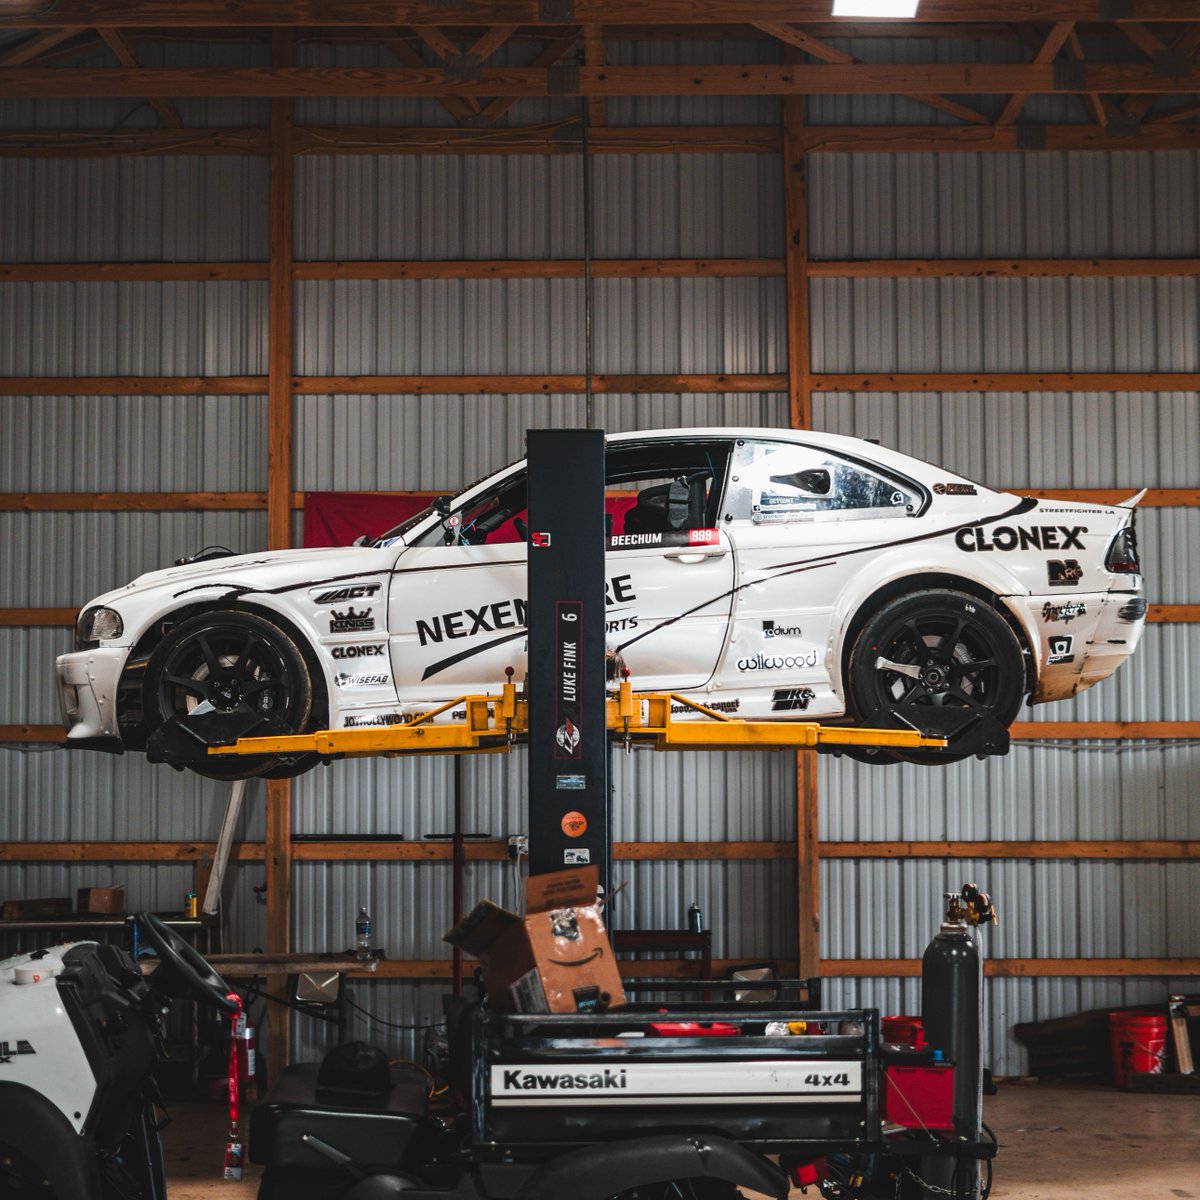 We wanna know what you're working on in the off-season! Drop a comment below with your Winter/Off-season Projects. @FormulaDrift #fd #formuladrift #clonex #nexentireusa #nexentire #tbr999